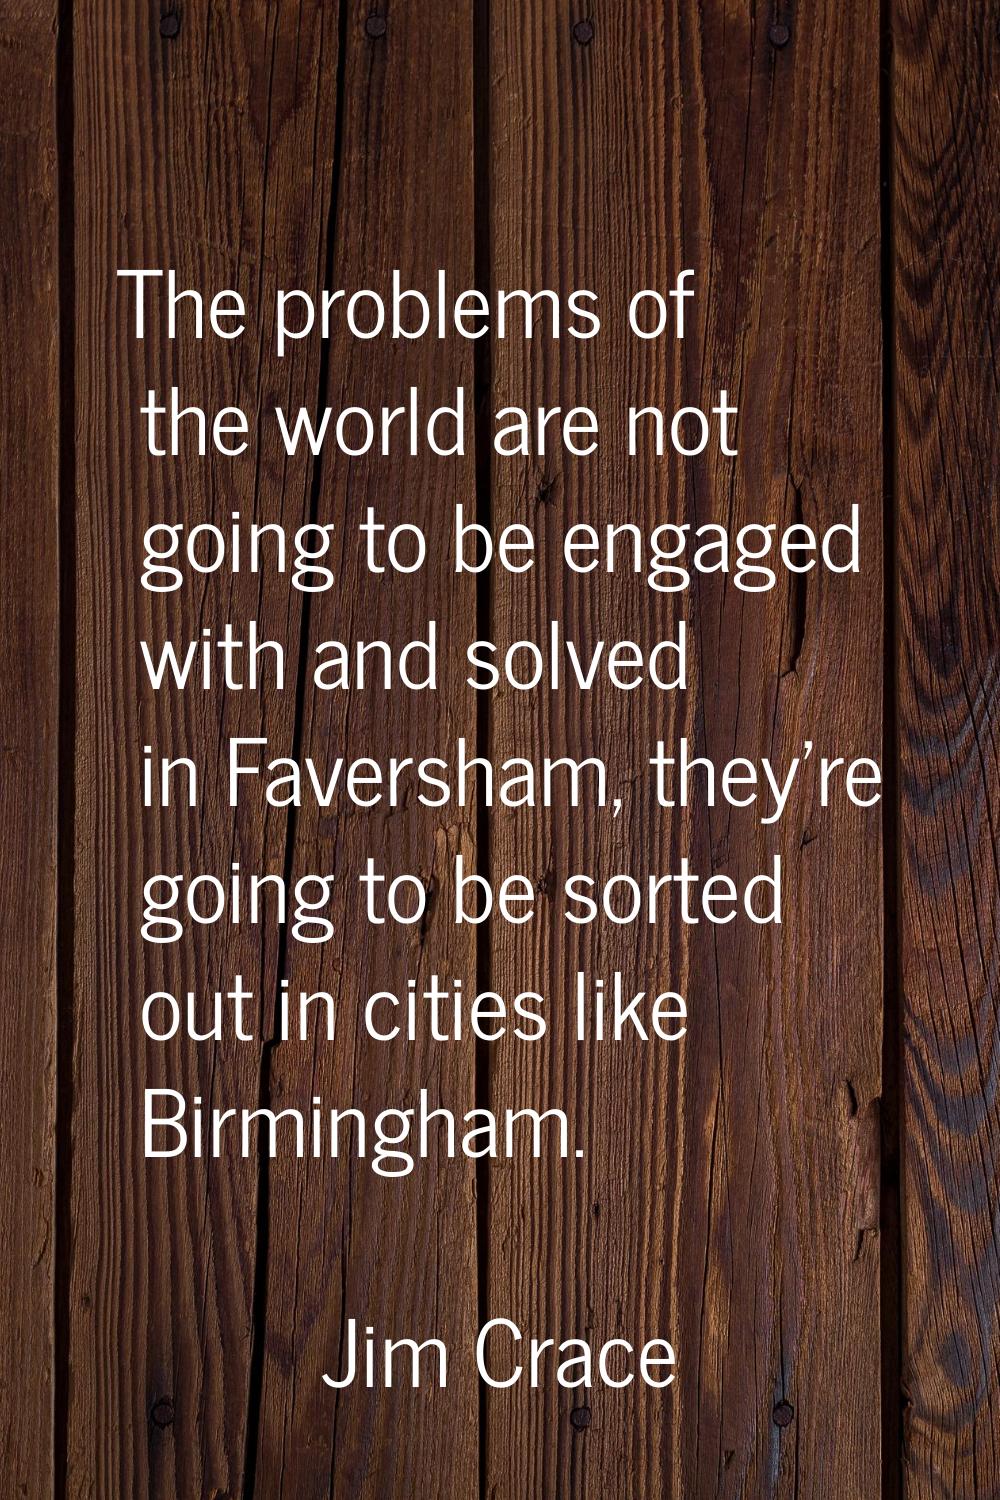 The problems of the world are not going to be engaged with and solved in Faversham, they're going t